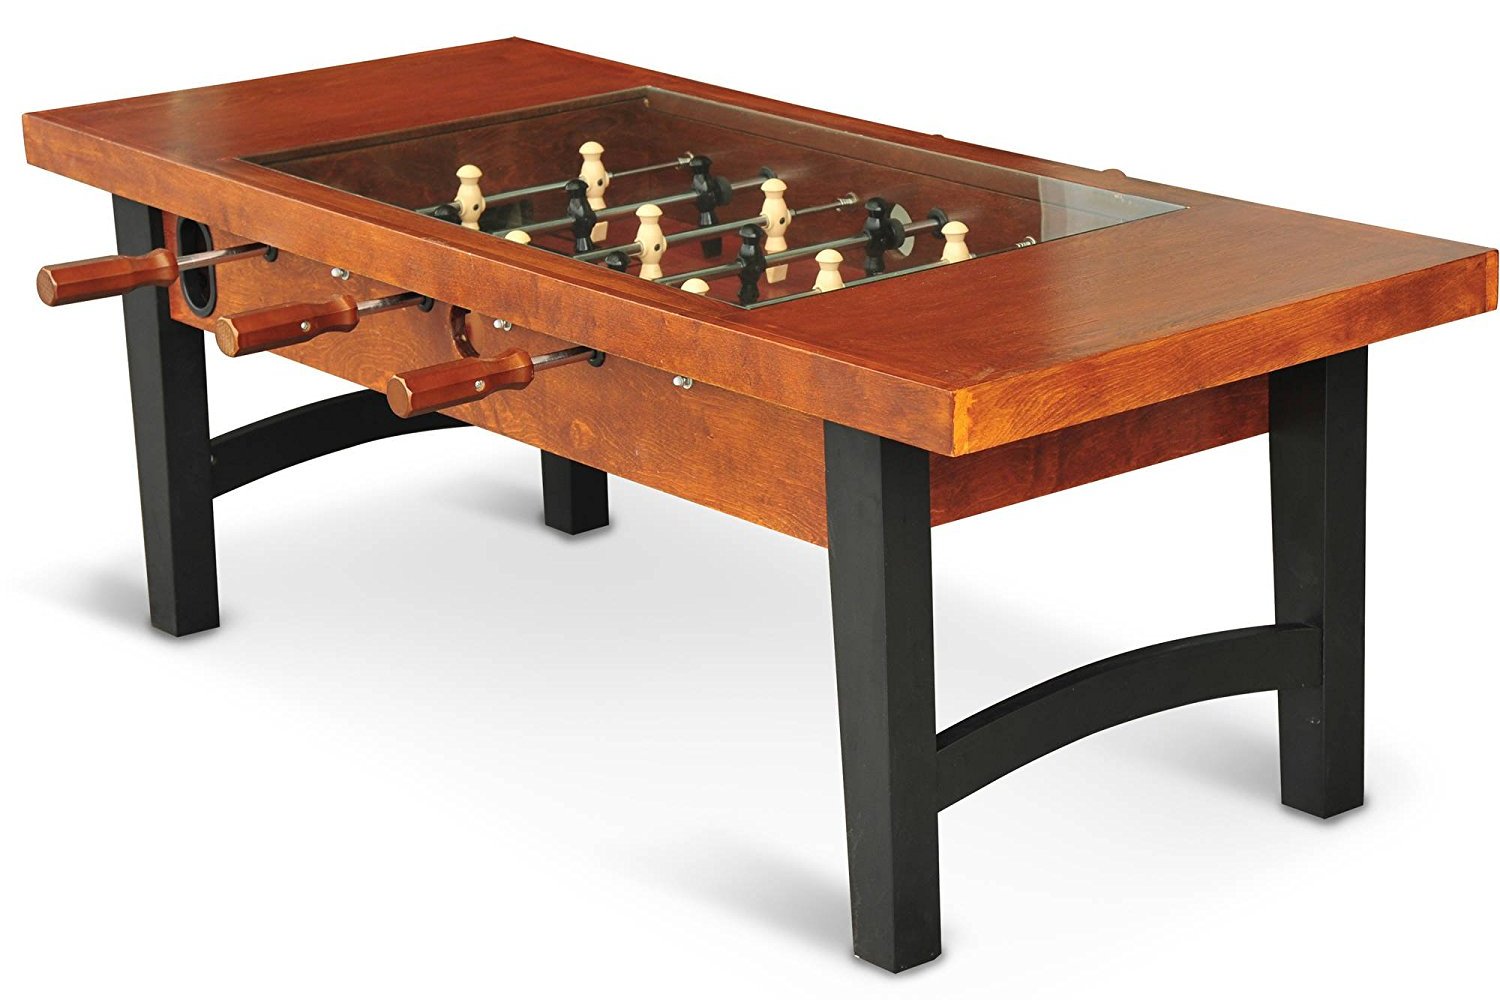 eastpoint sports foosball soccer game wooden coffee table image